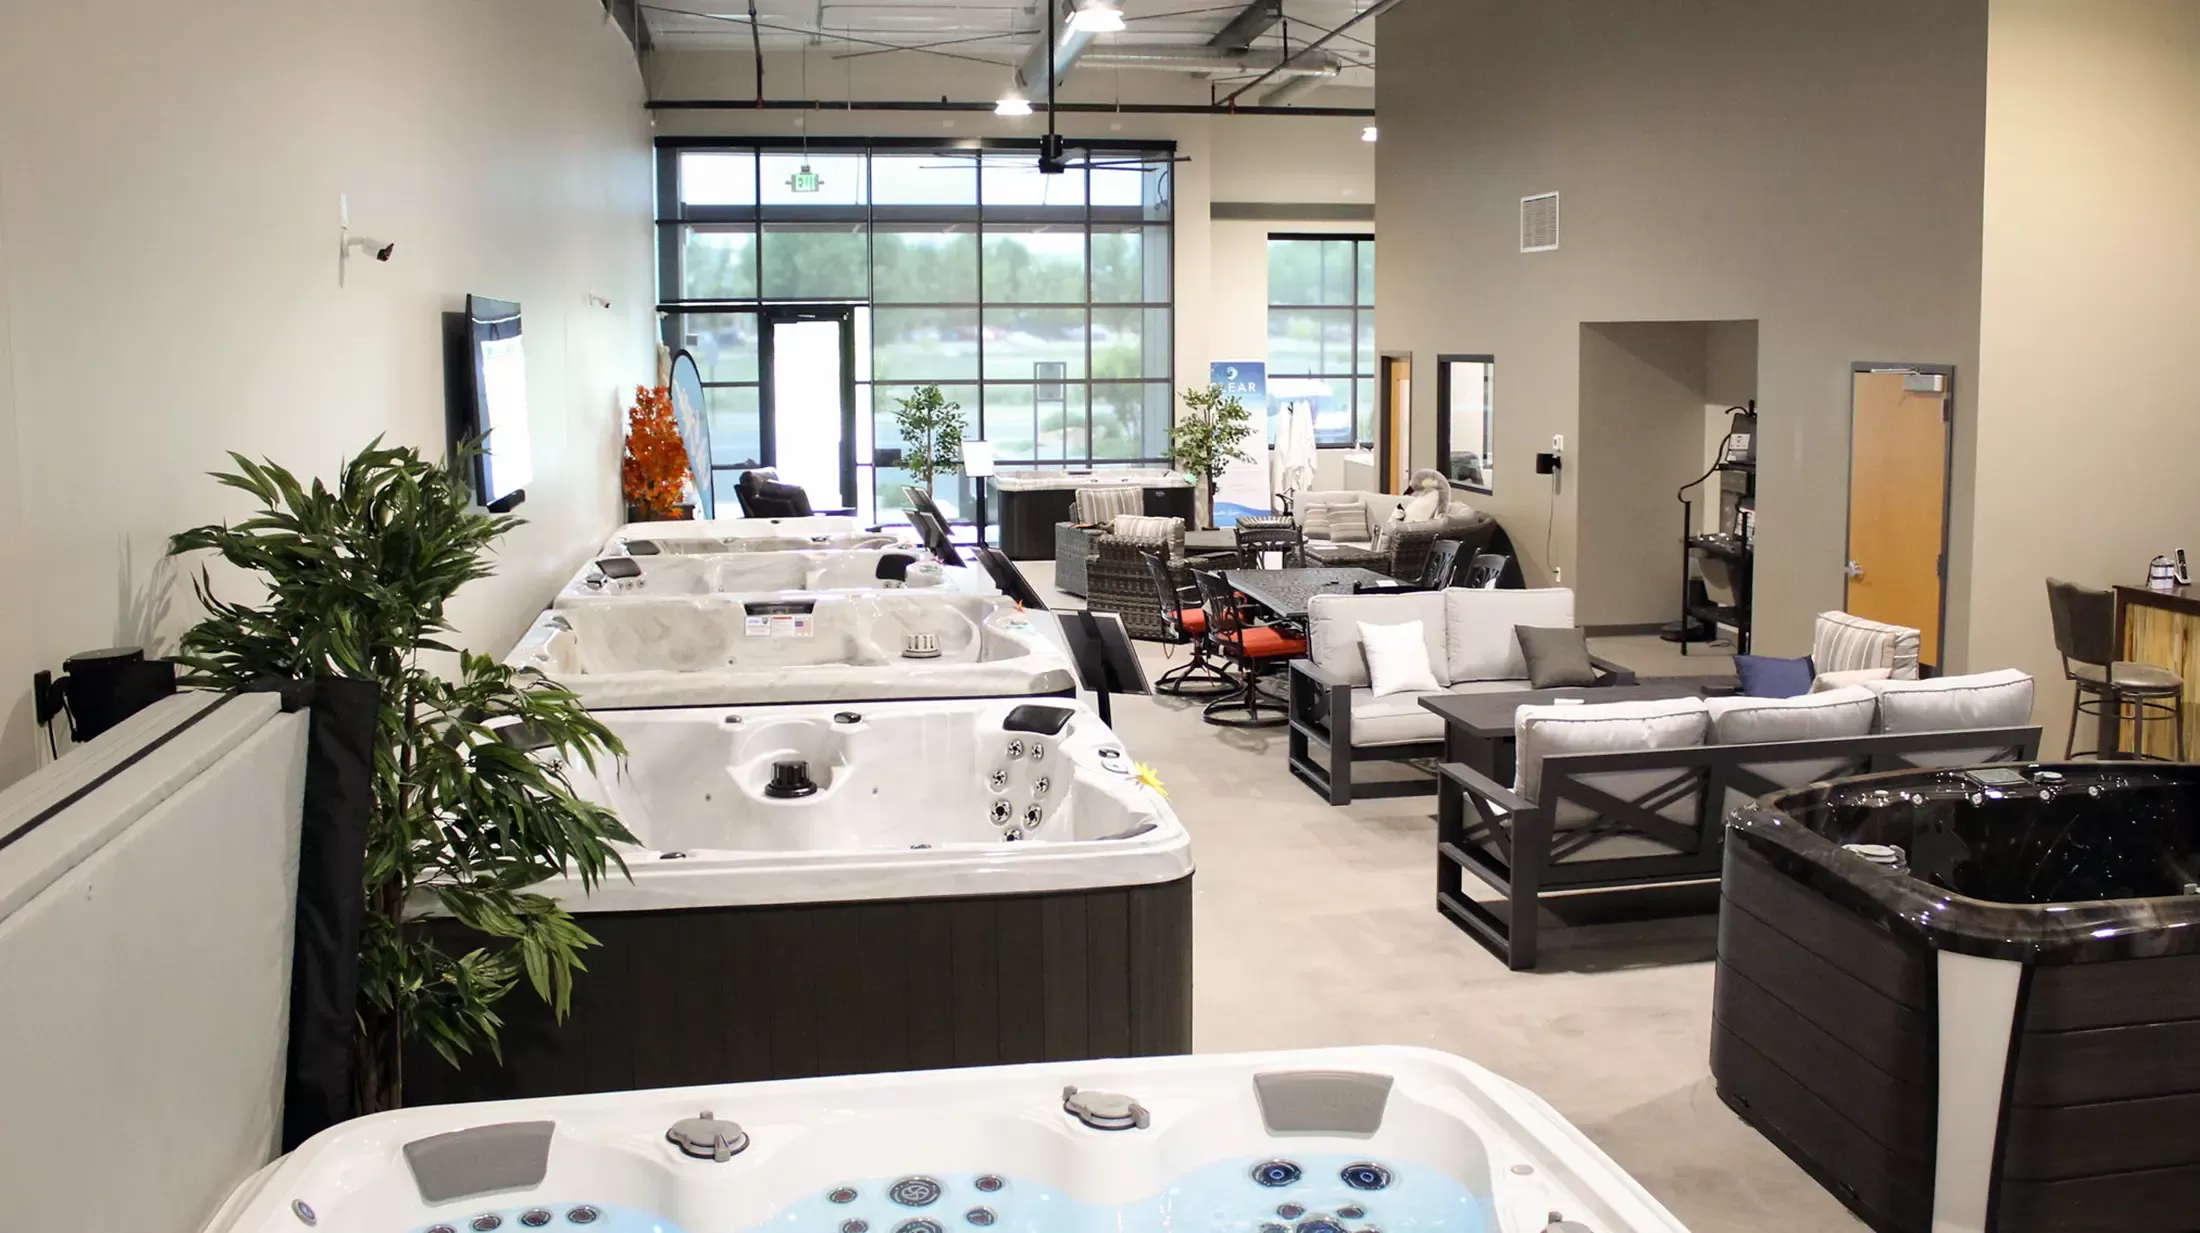 Family Time Spa showroom with hot tubs and swim spas